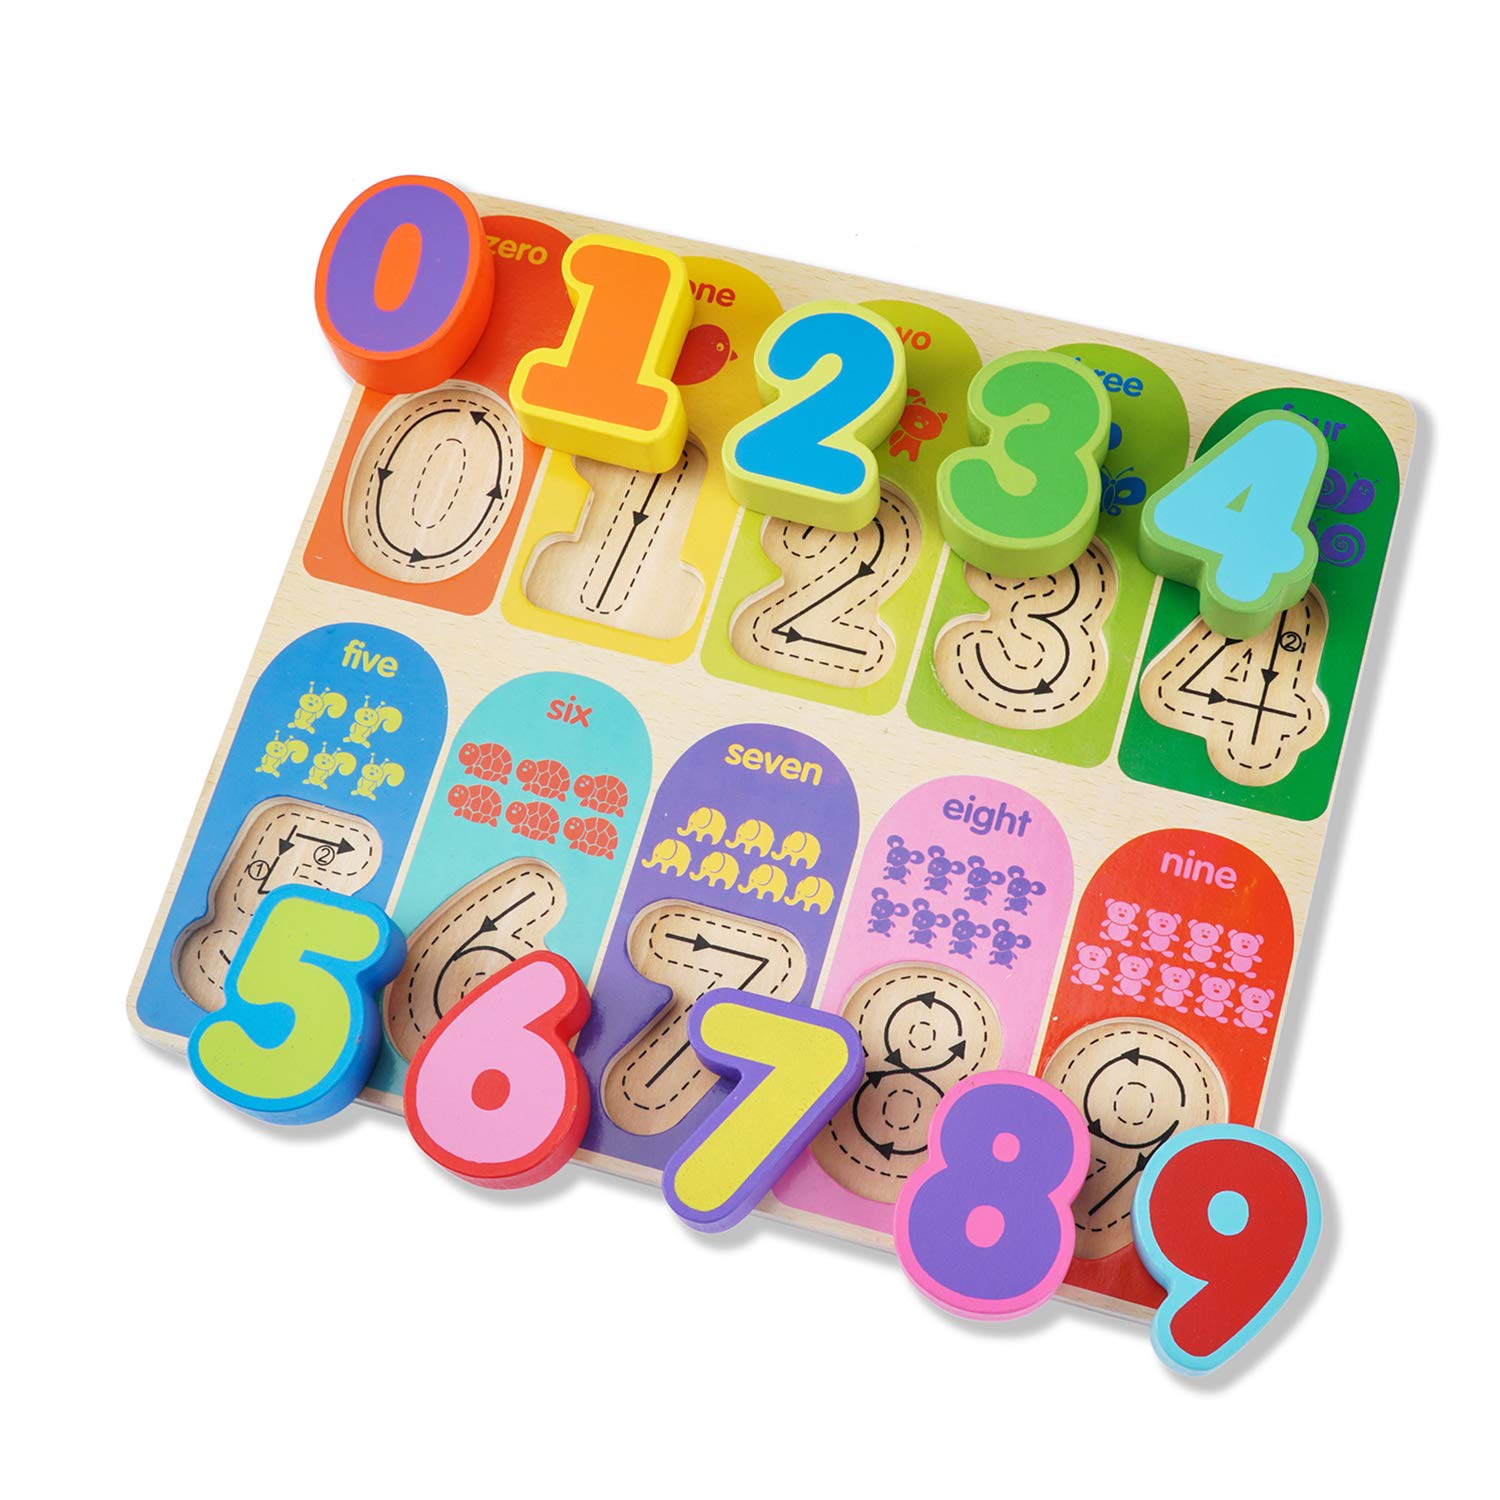 Jamohom Kid Wooden Numbers Puzzle Board Preschool Intelligence Early Educational Math Toys for Toddlers 10 Pieces